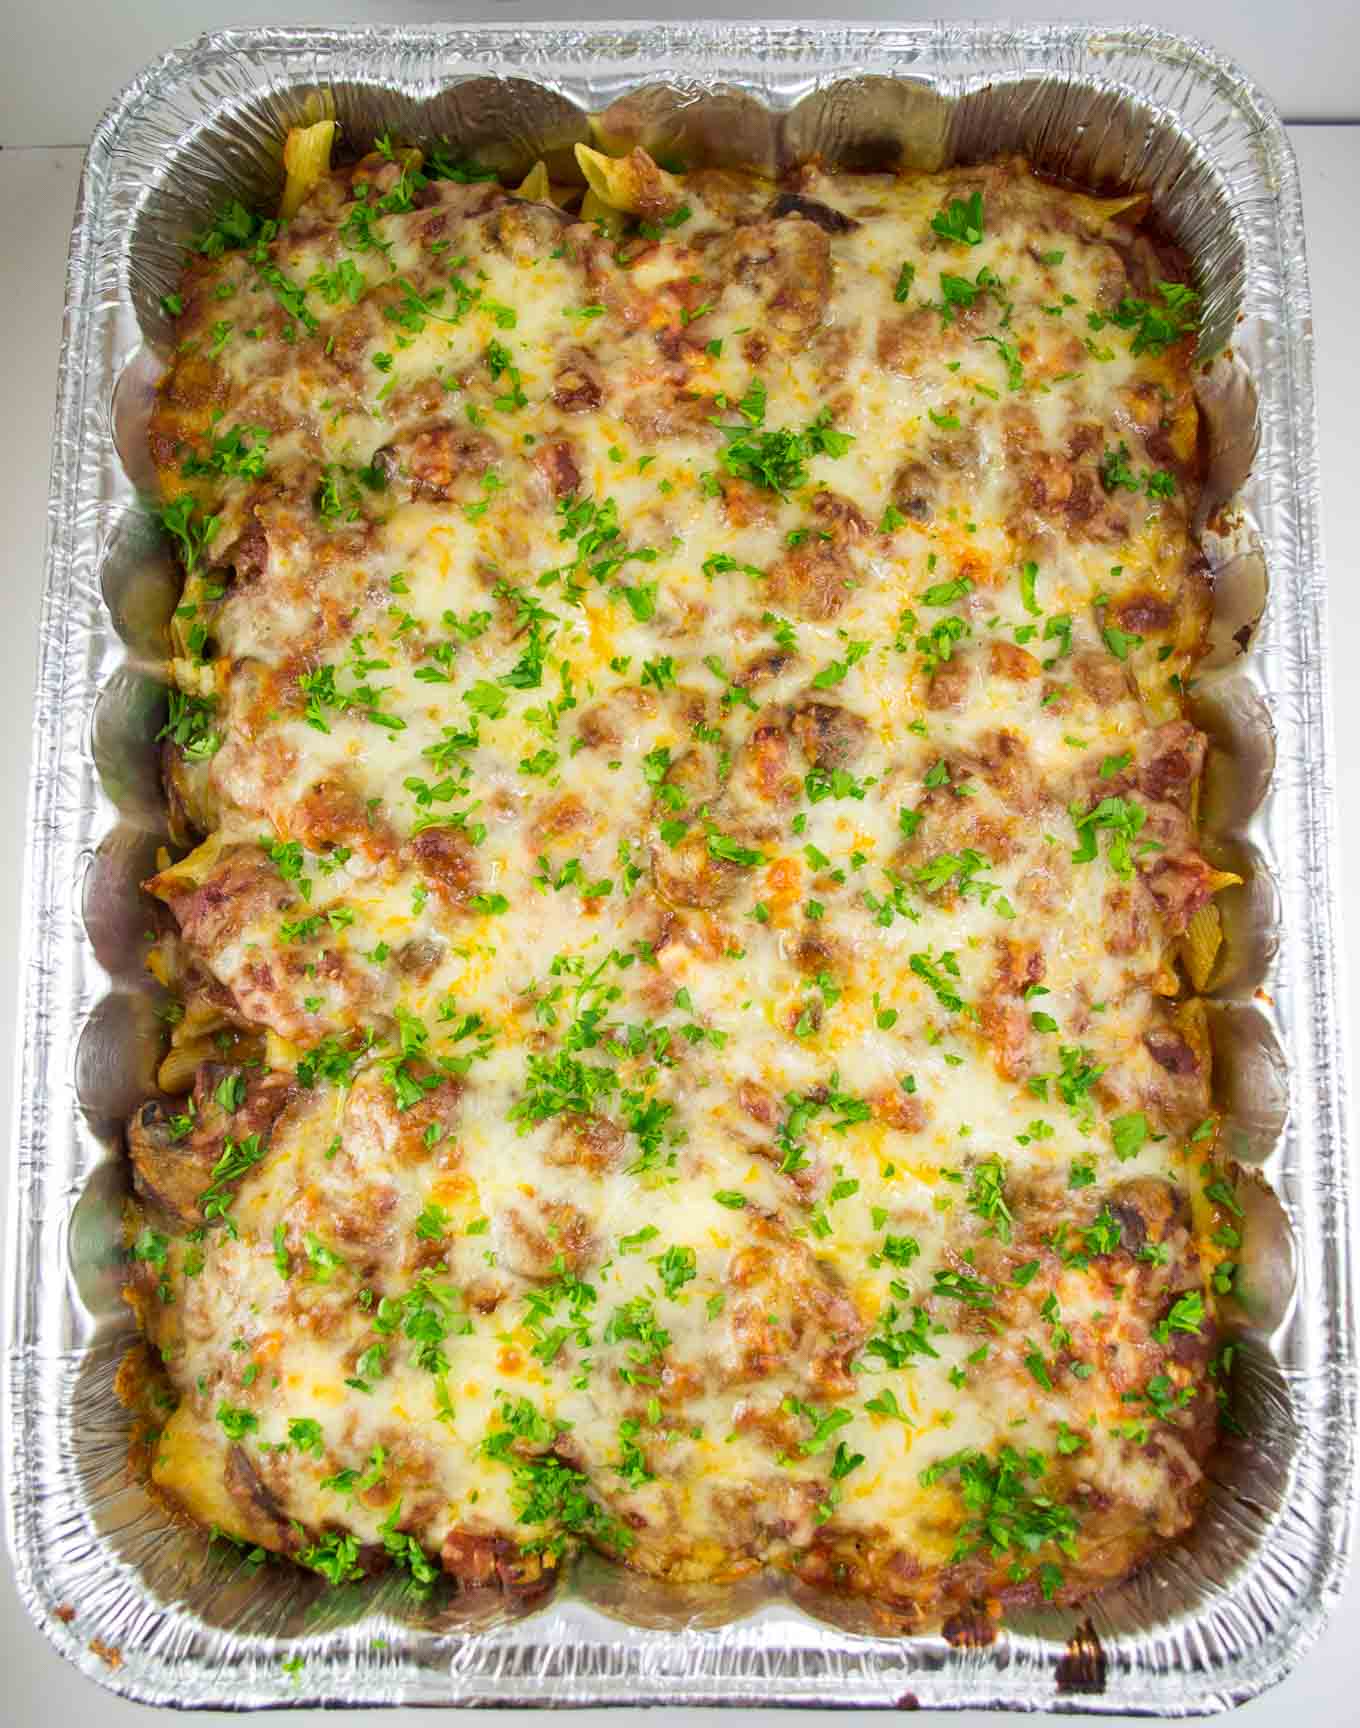 Freezer Friendly Oven Baked Ziti – an easy and delicious make ahead meal that can be frozen for later or cooked right away!